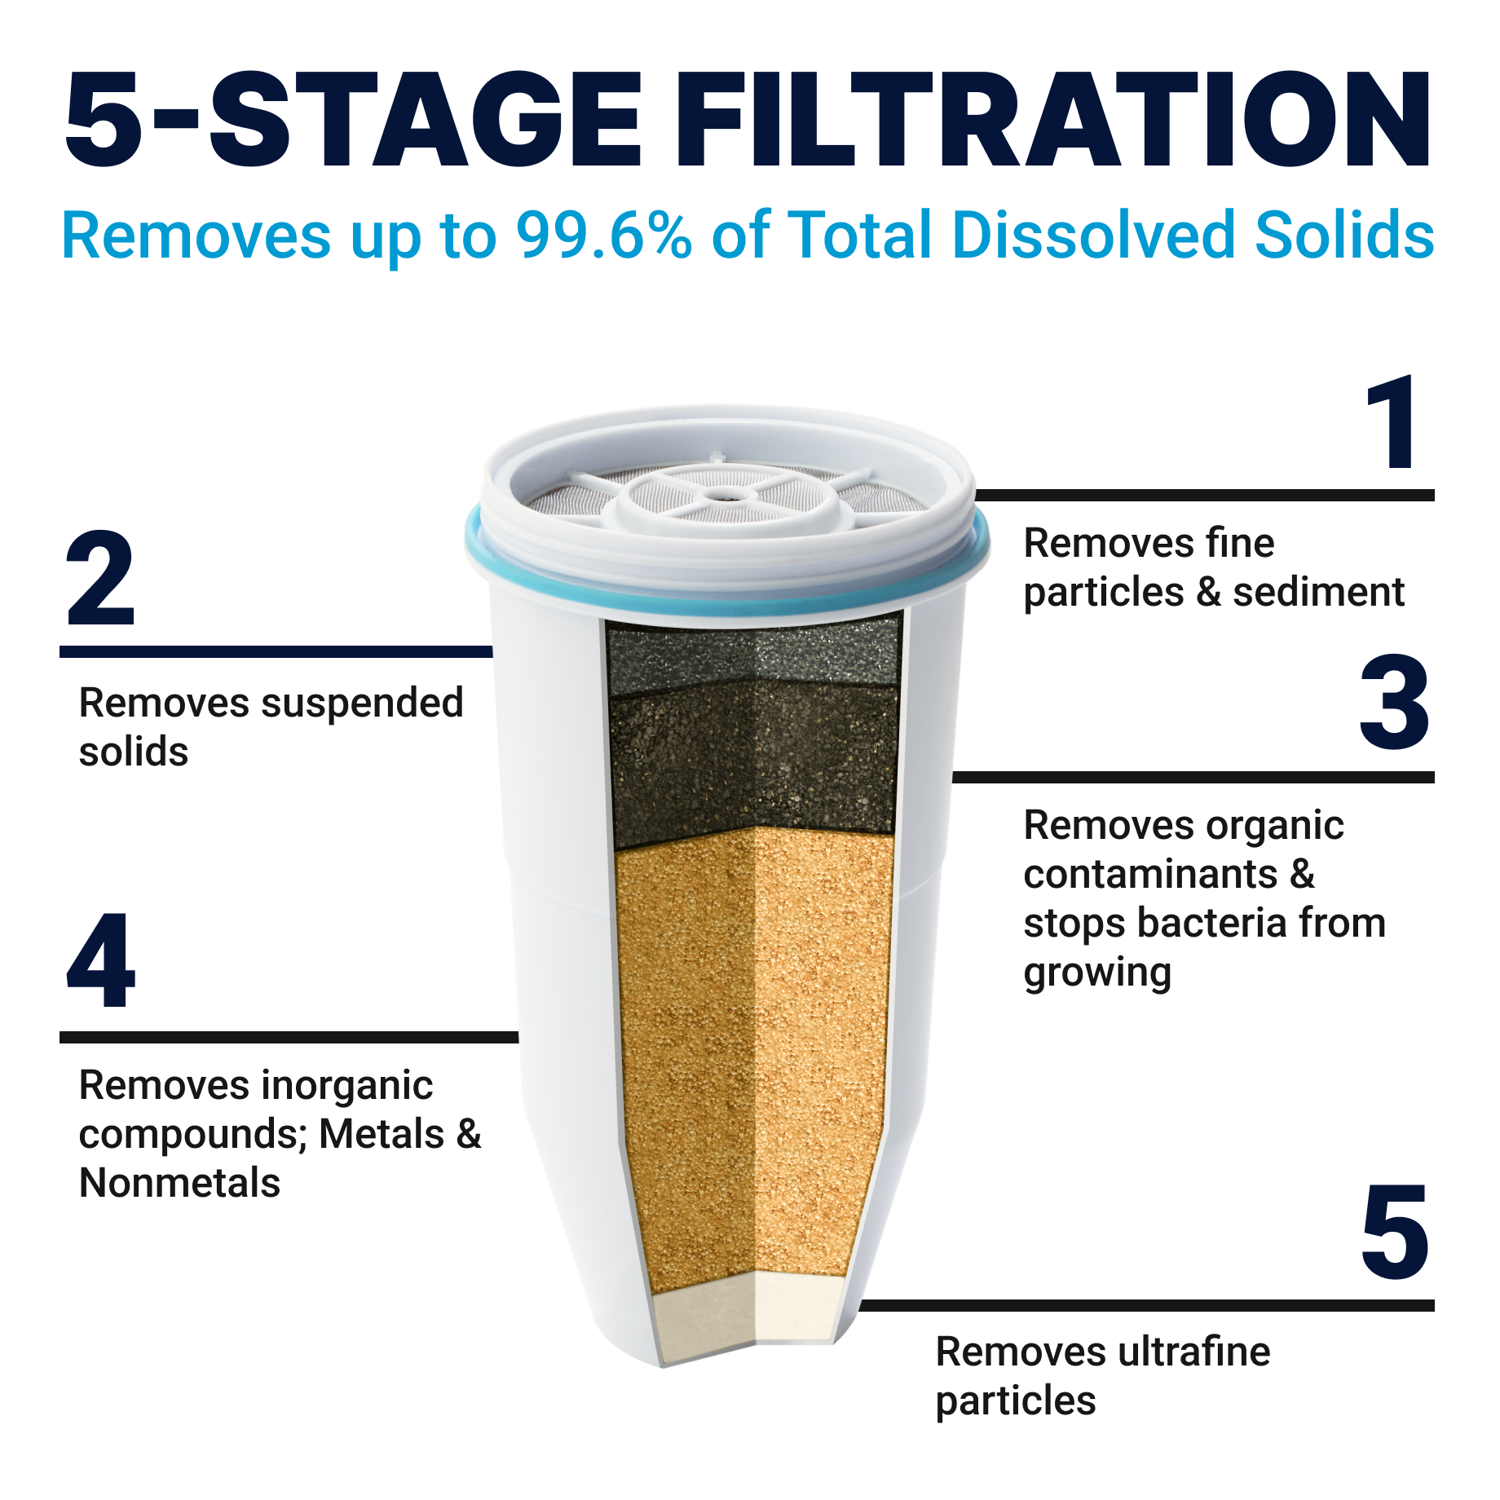 5-stage filtration. Removes up to 99.6% total dissolved solids